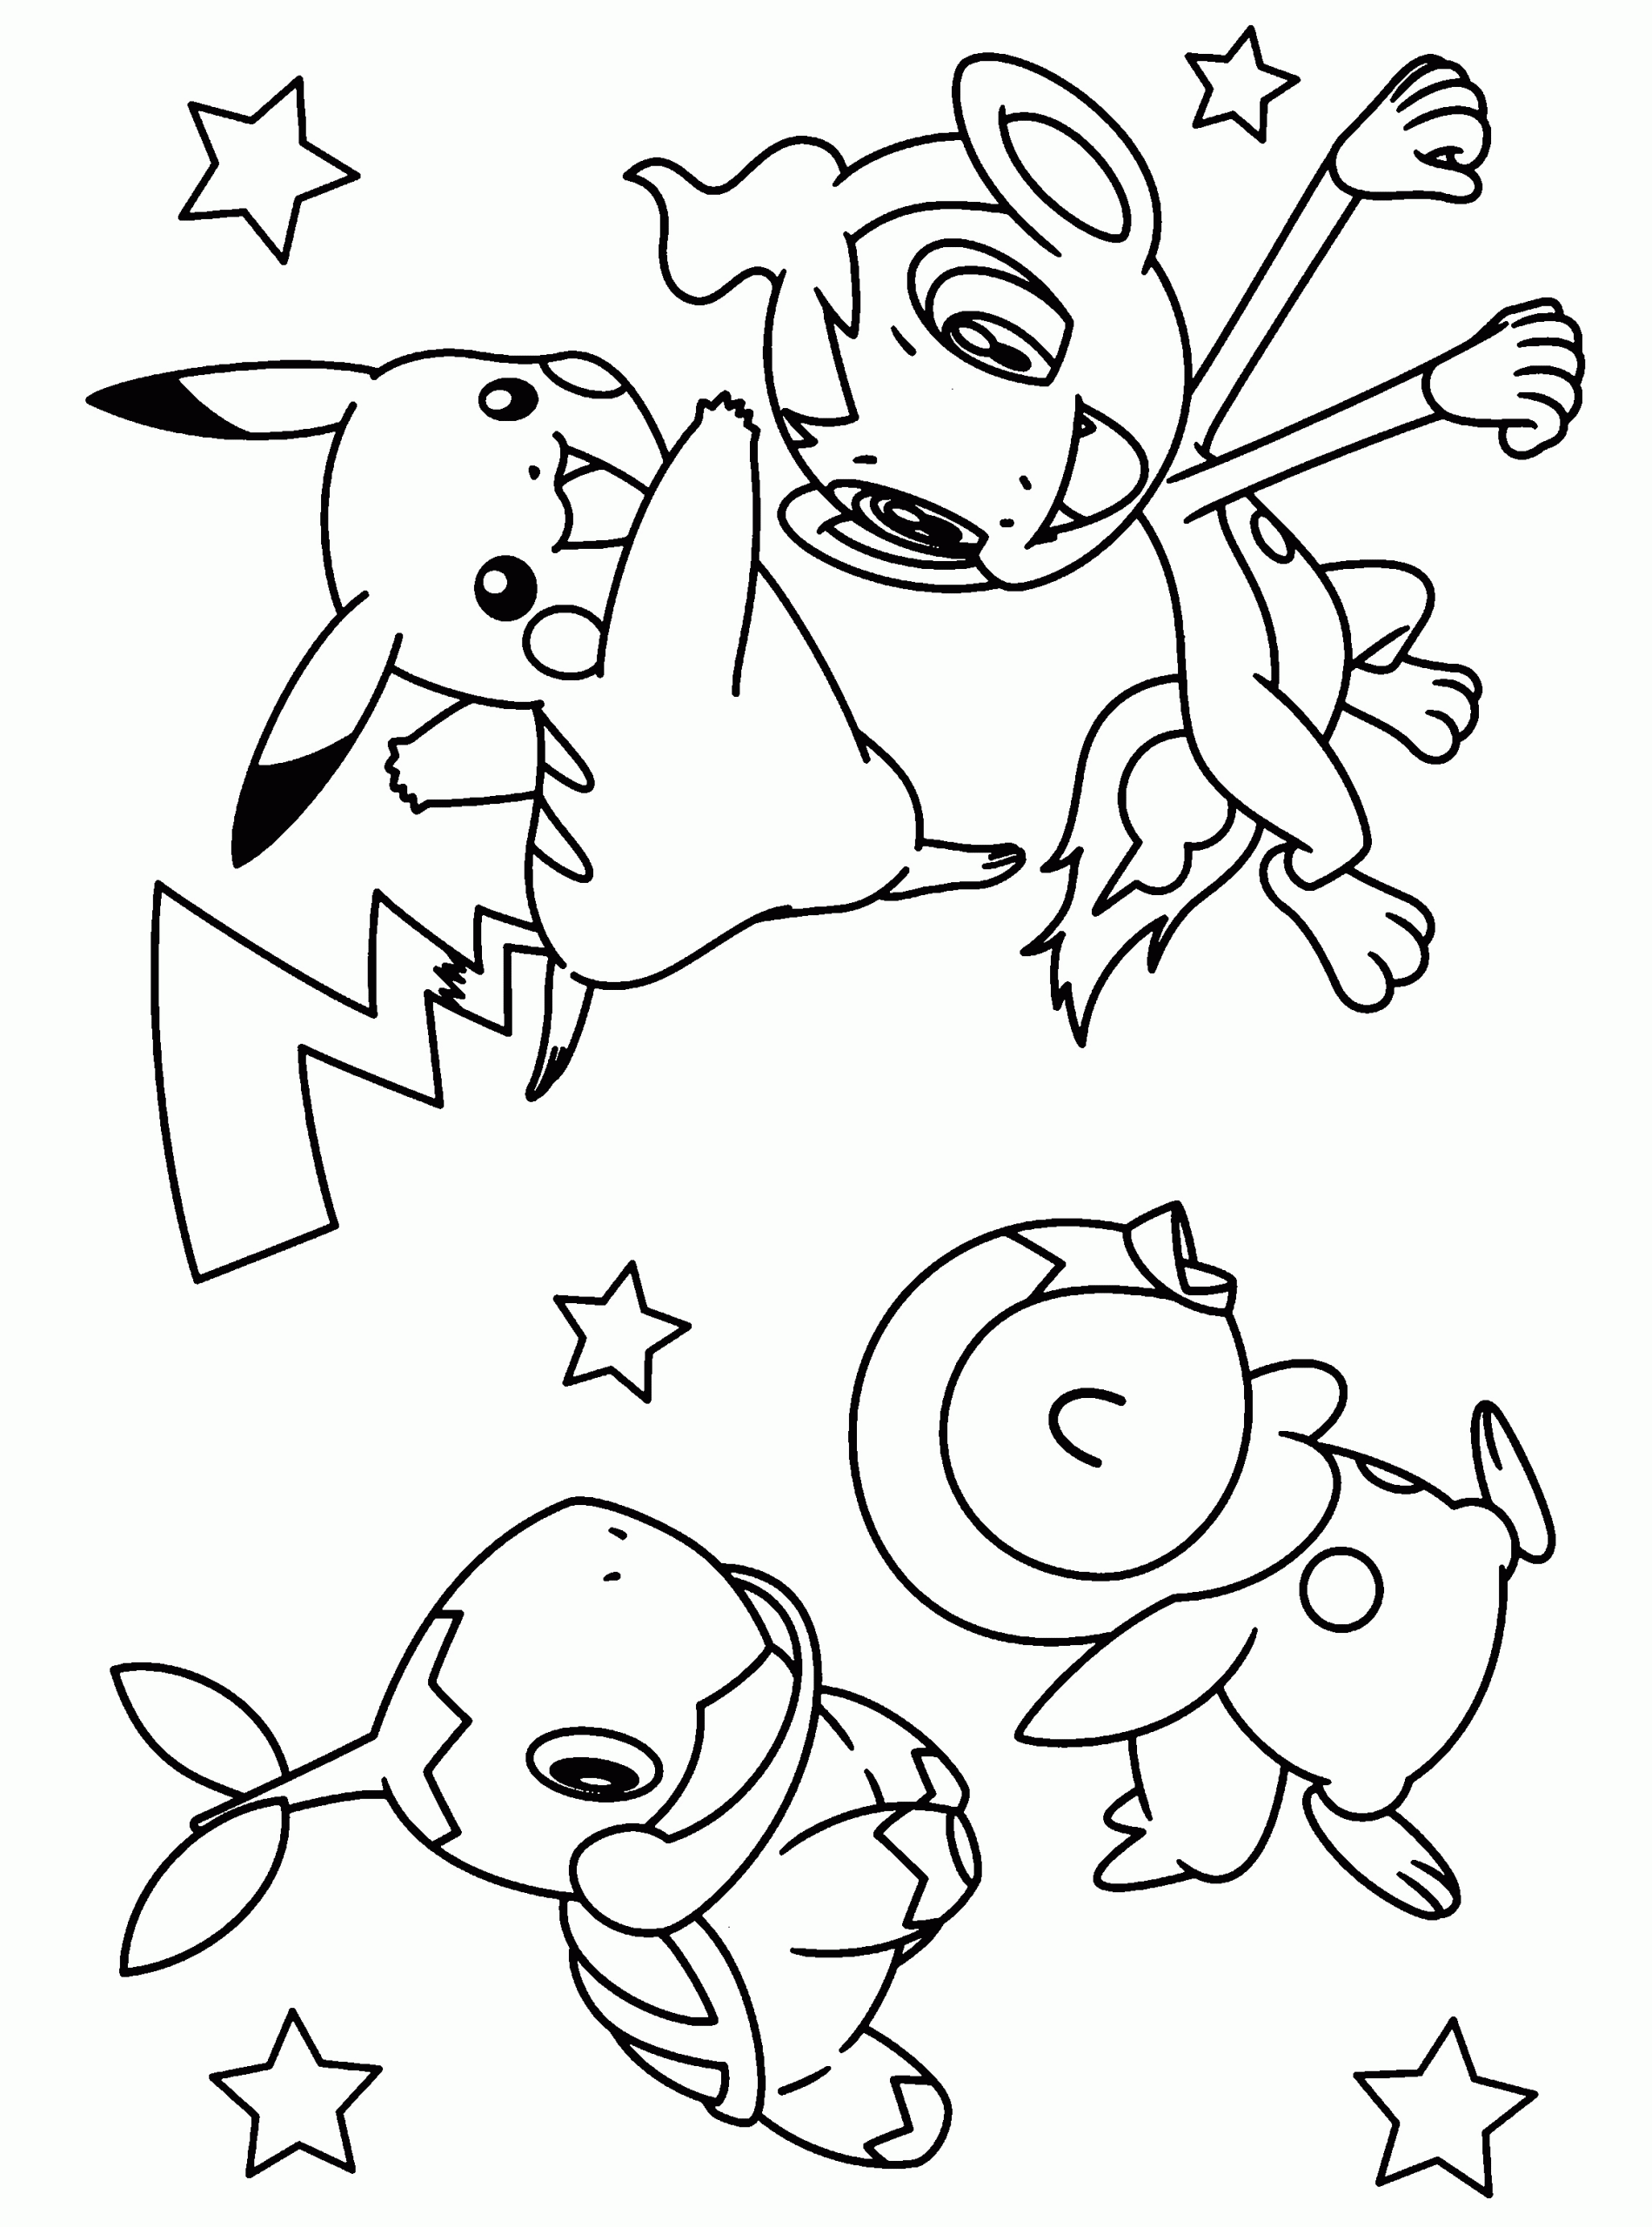 Kids Coloring Pages Pokemon
 55 Pokemon Coloring Pages For Kids